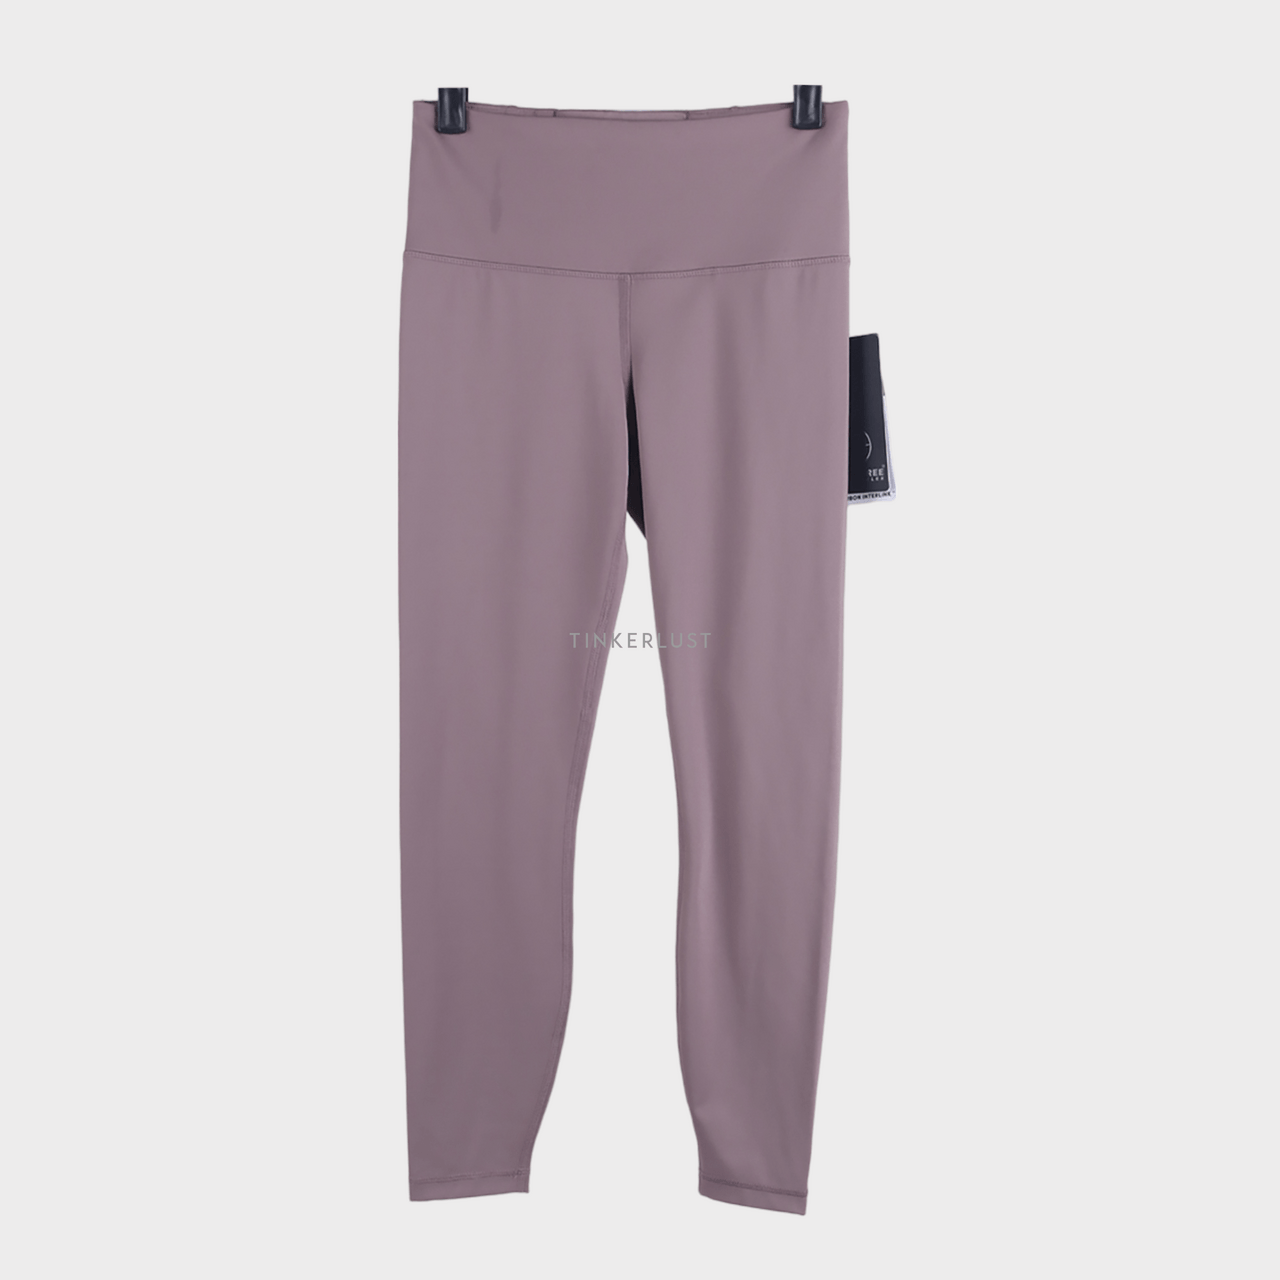 90 Degree by Reflex Taupe Pants